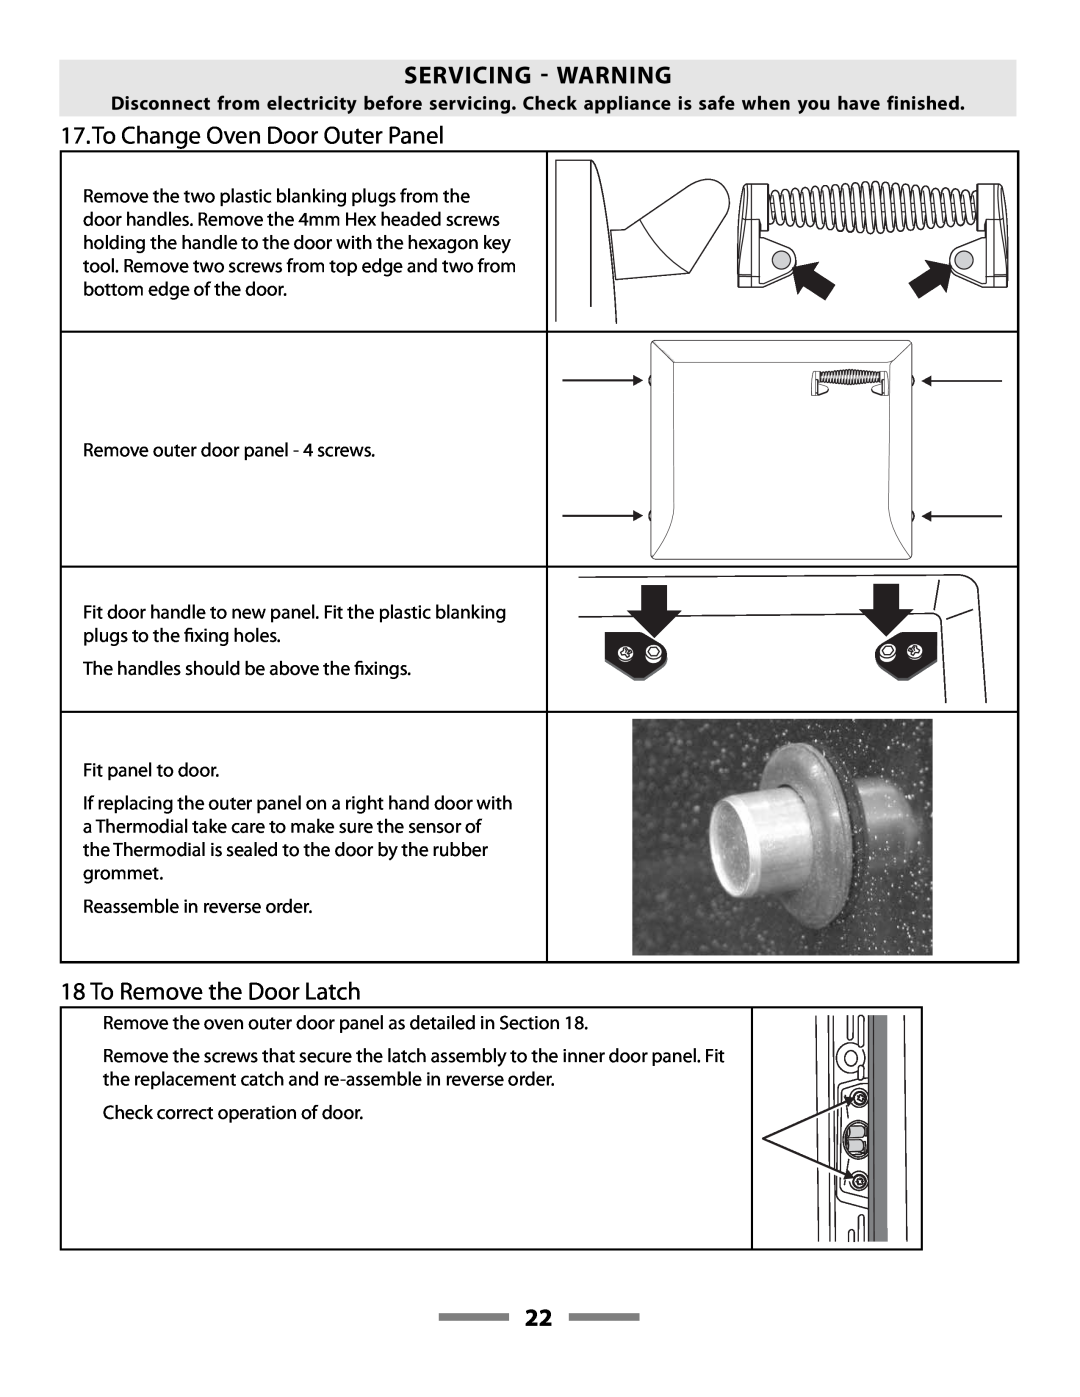 Aga Ranges F107411-01 manual To Change Oven Door Outer Panel, To Remove the Door Latch, Servicing  Warning 